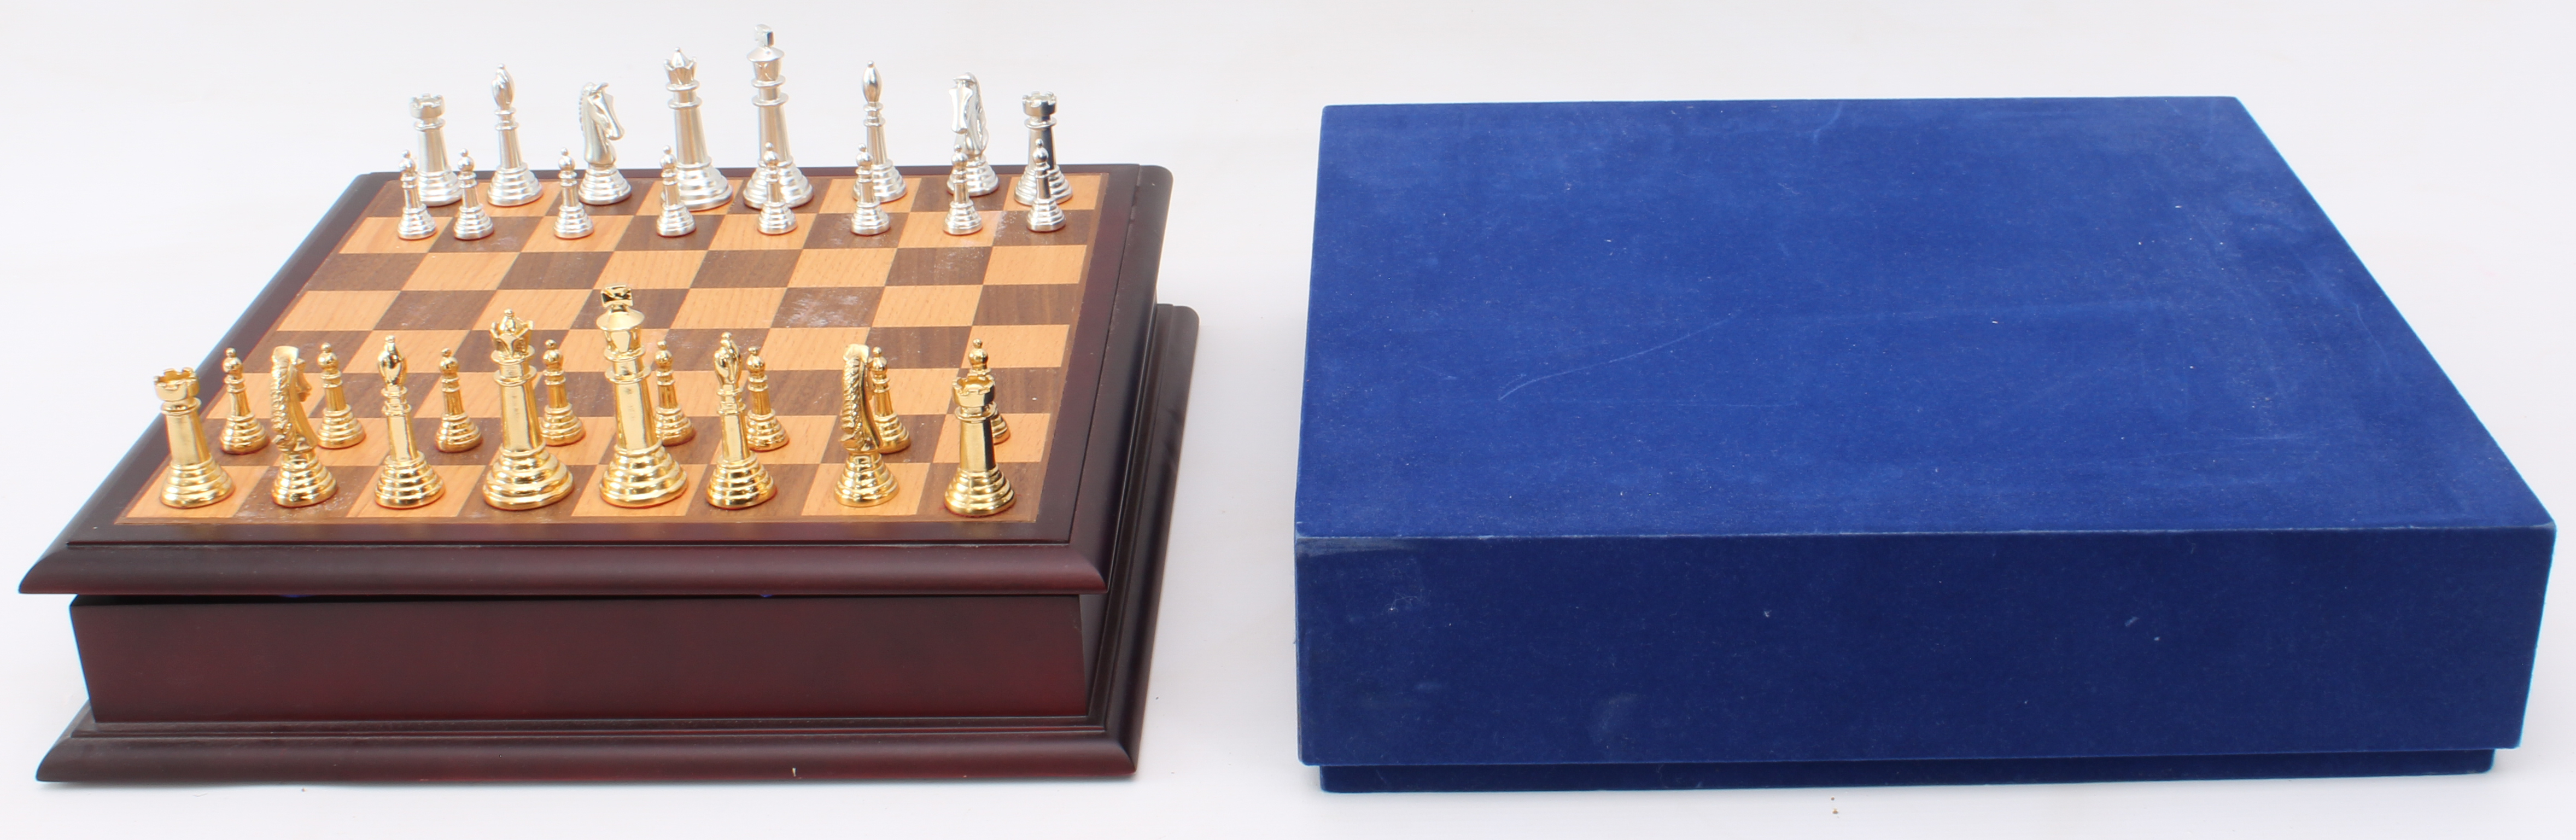 A cased chess set and board - late 20th century, the silver-coloured and gold-coloured cast metal - Image 3 of 4